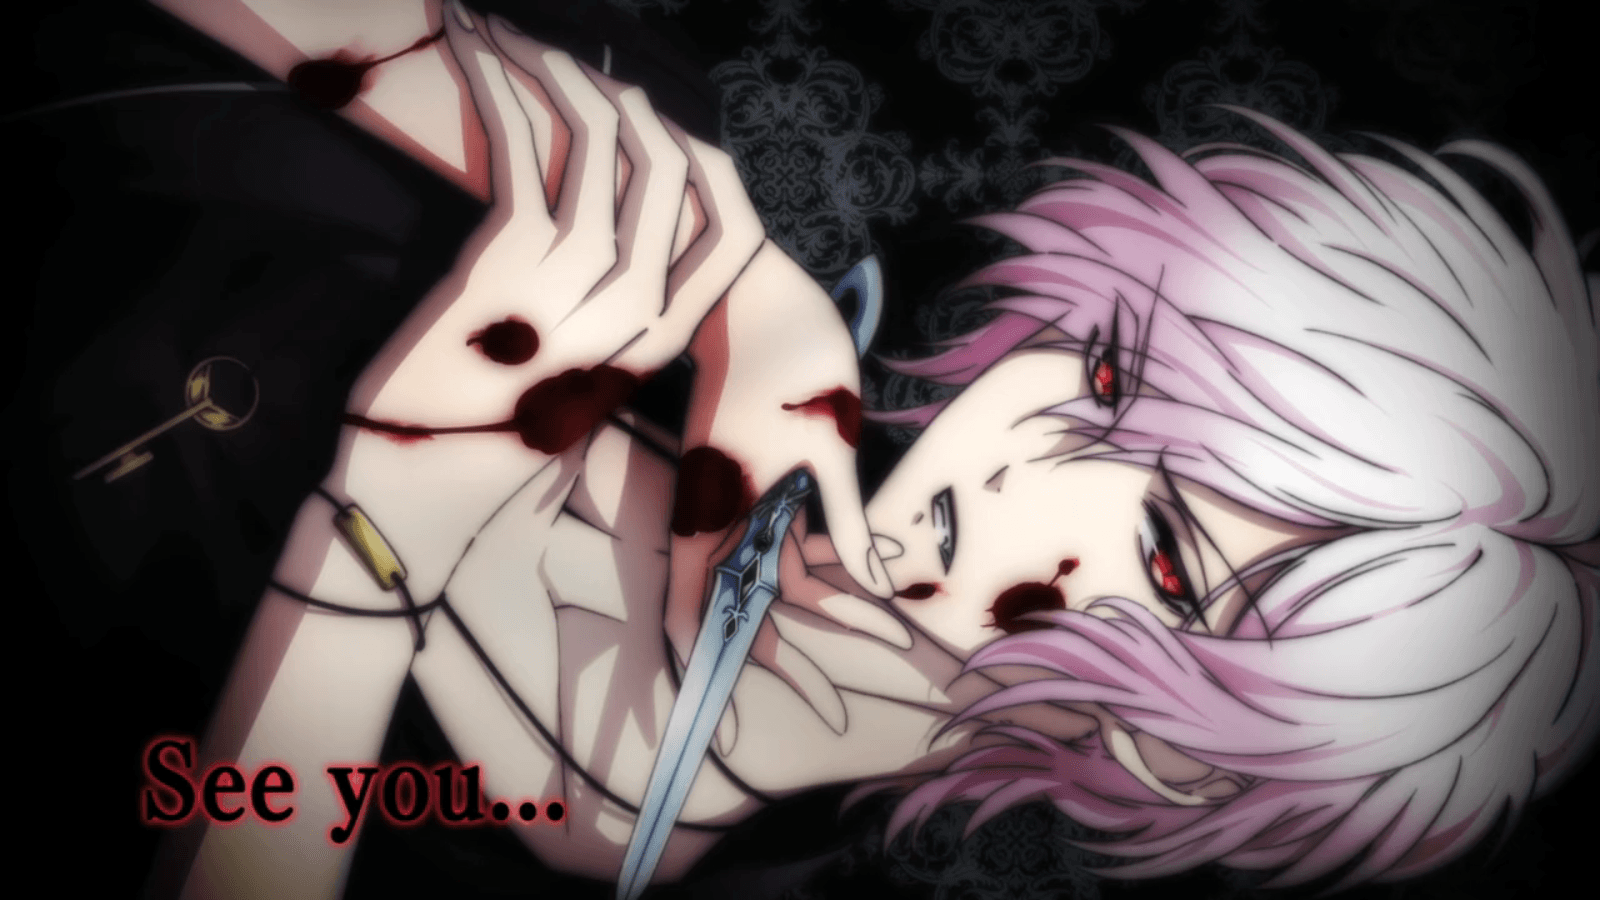 1000+ image about Diabolik Lovers.